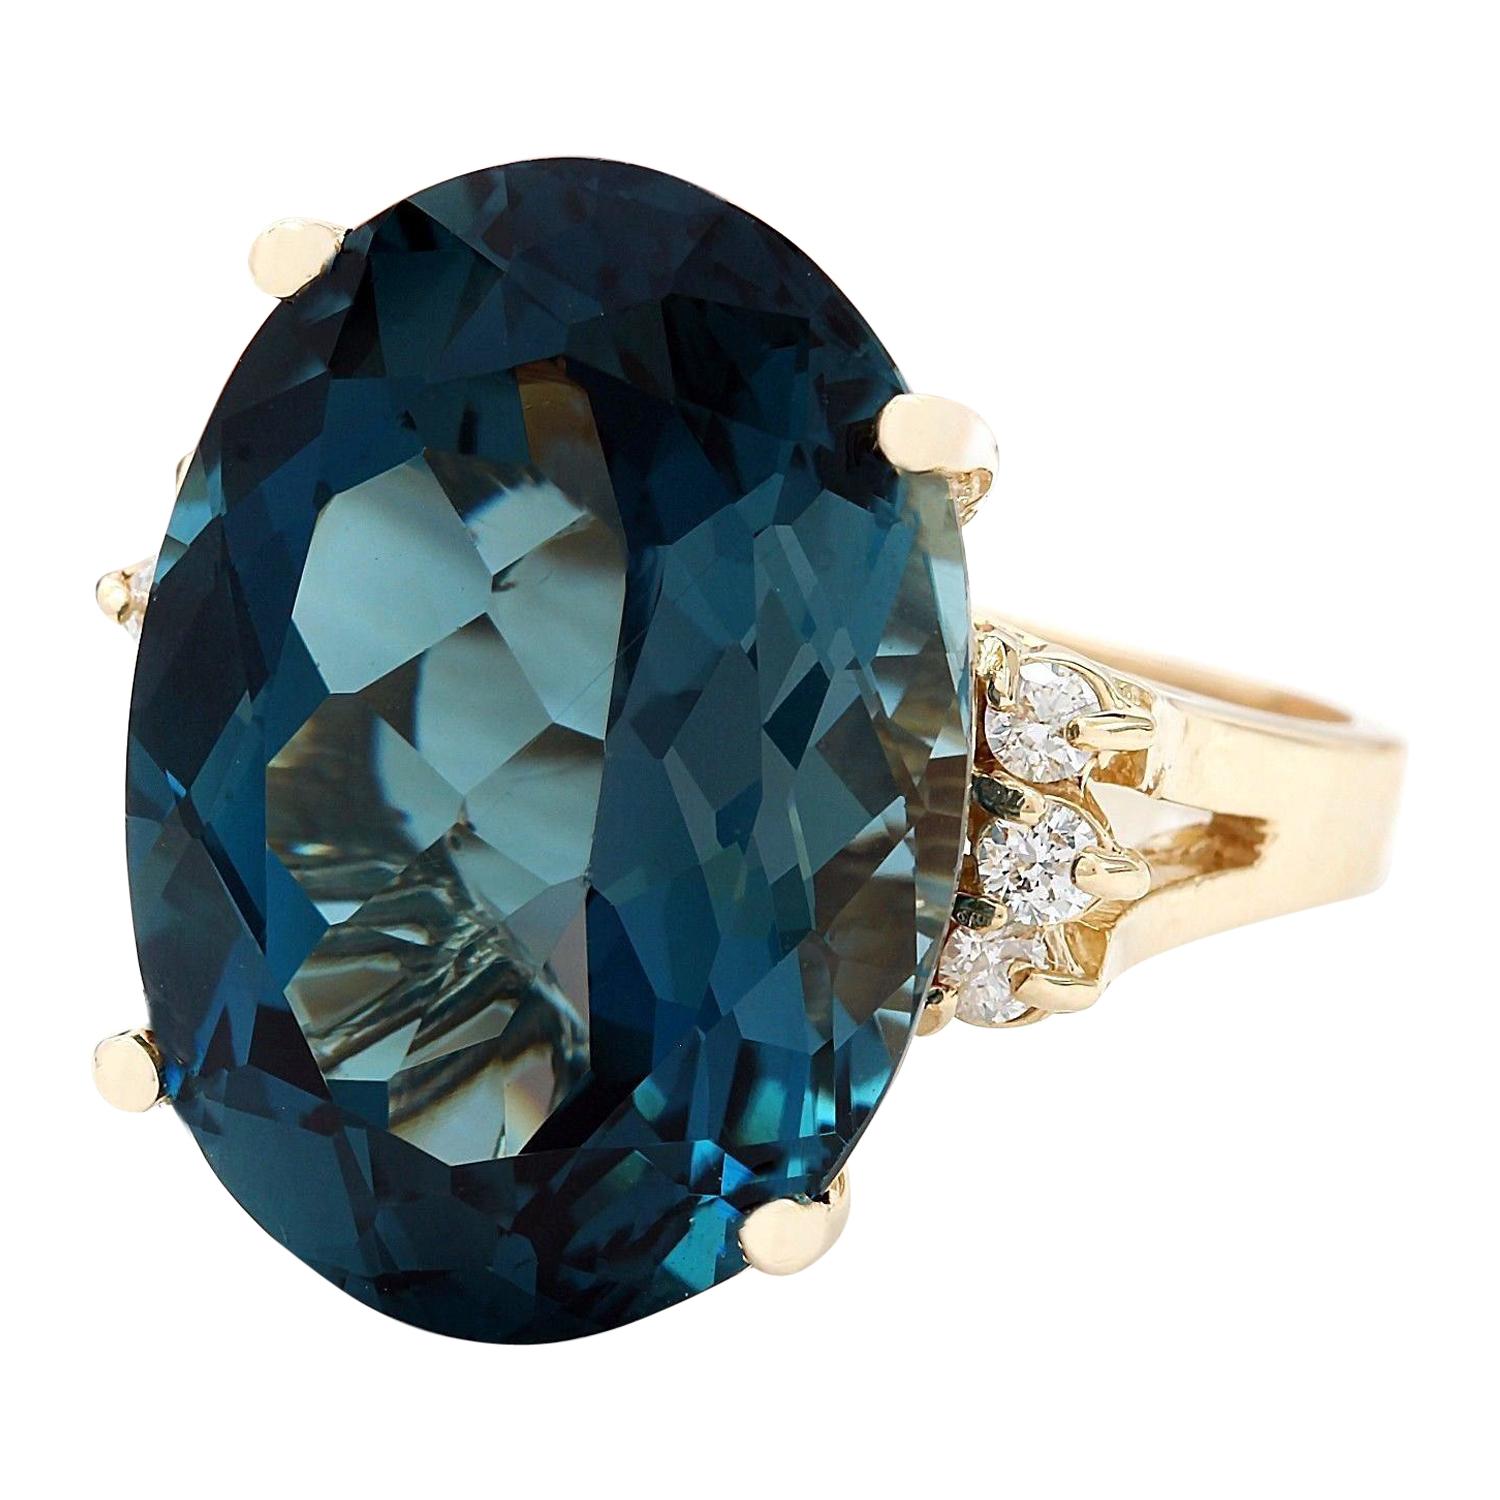 12.25 Carat Natural Topaz 14K Solid Yellow Gold Diamond Ring
 Item Type: Ring
 Item Style: Cocktail
 Material: 14K Yellow Gold
 Mainstone: Topaz
 Stone Color: Blue
 Stone Weight: 12.05 Carat
 Stone Shape: Oval
 Stone Quantity: 1
 Stone Dimensions: